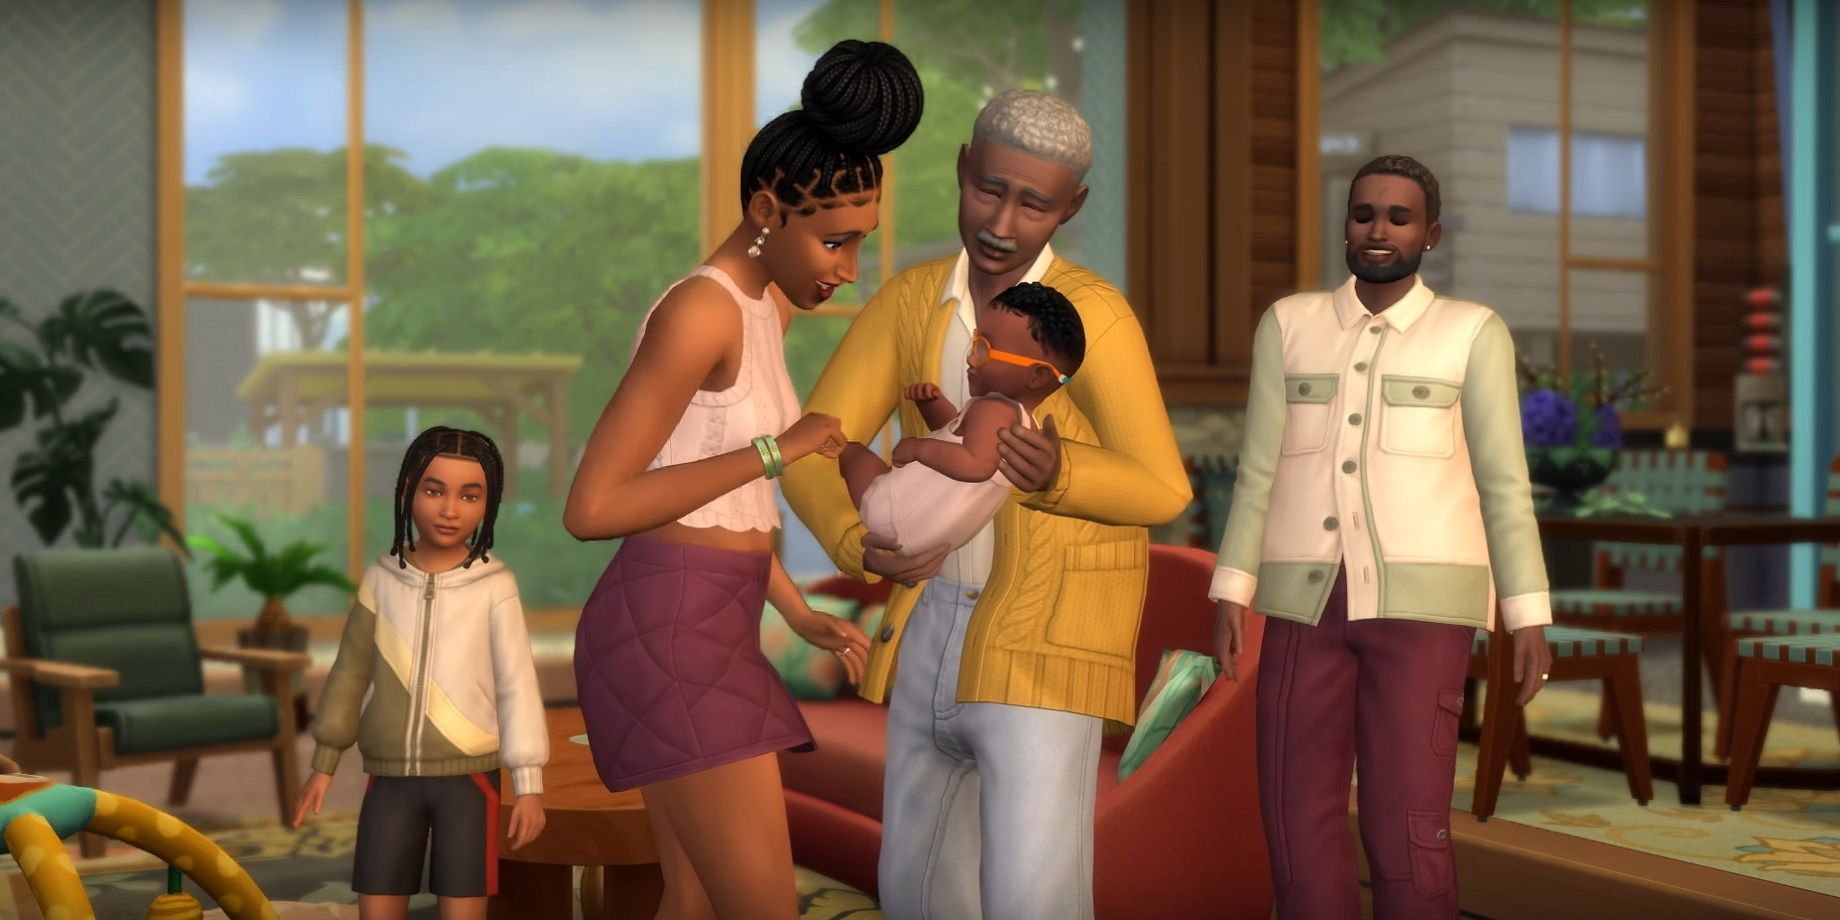 A happy family in the Sims 4 with an infant